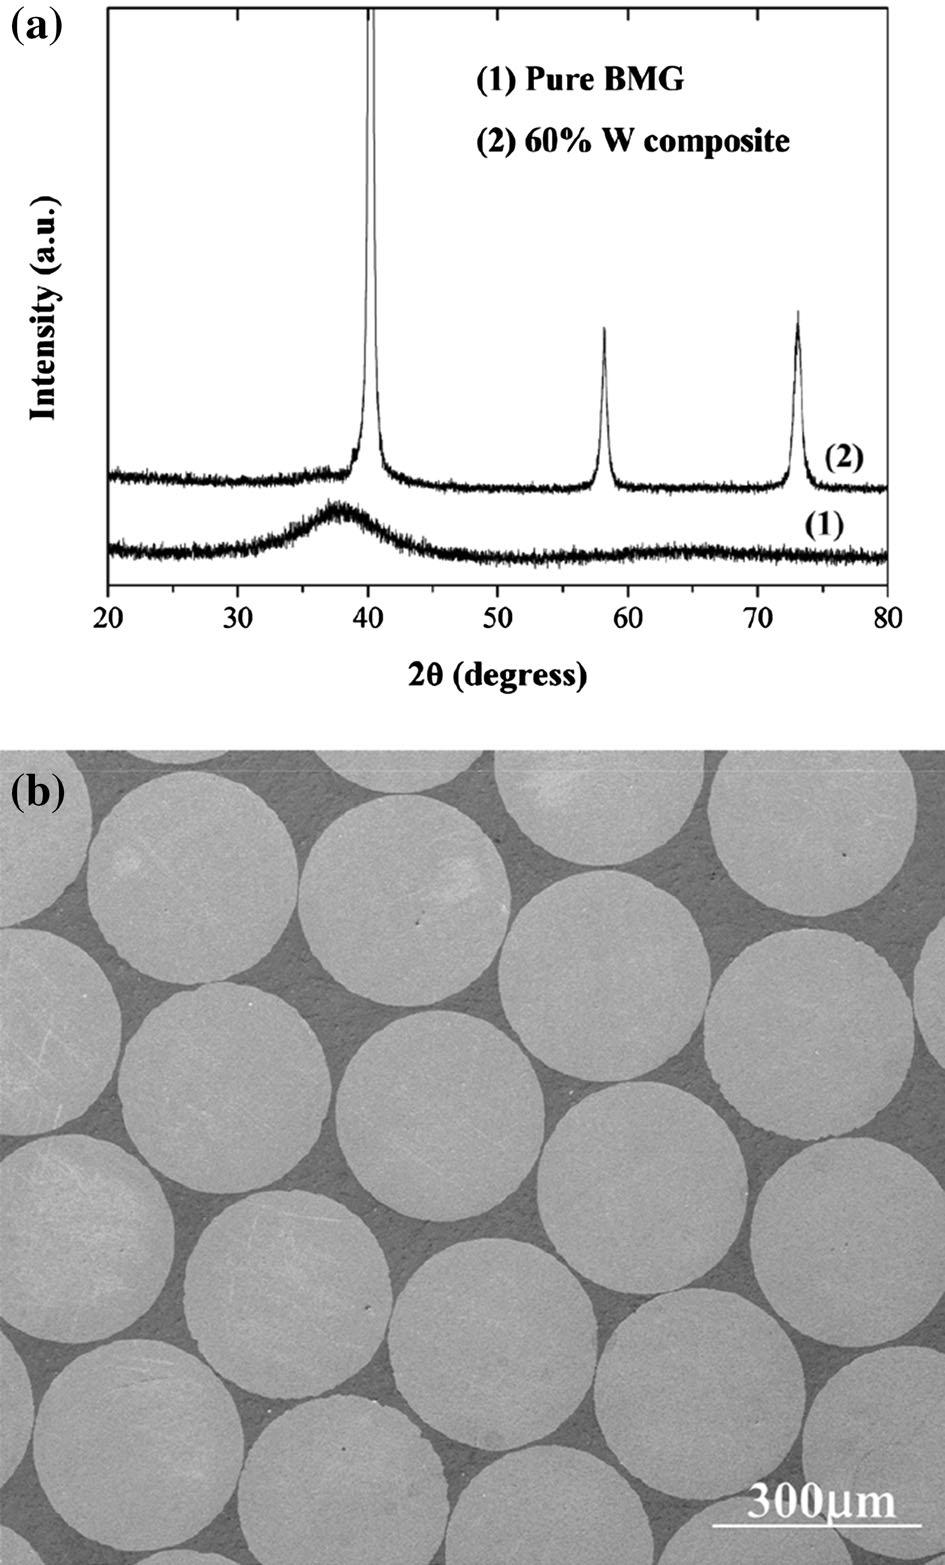 increases. Qiu et al. [32] conducted compressive experiments on the tungsten fiber reinforced ZrAlNiCuSi BMG matrix composite. Their results are consistent with the observations of Conner et al.